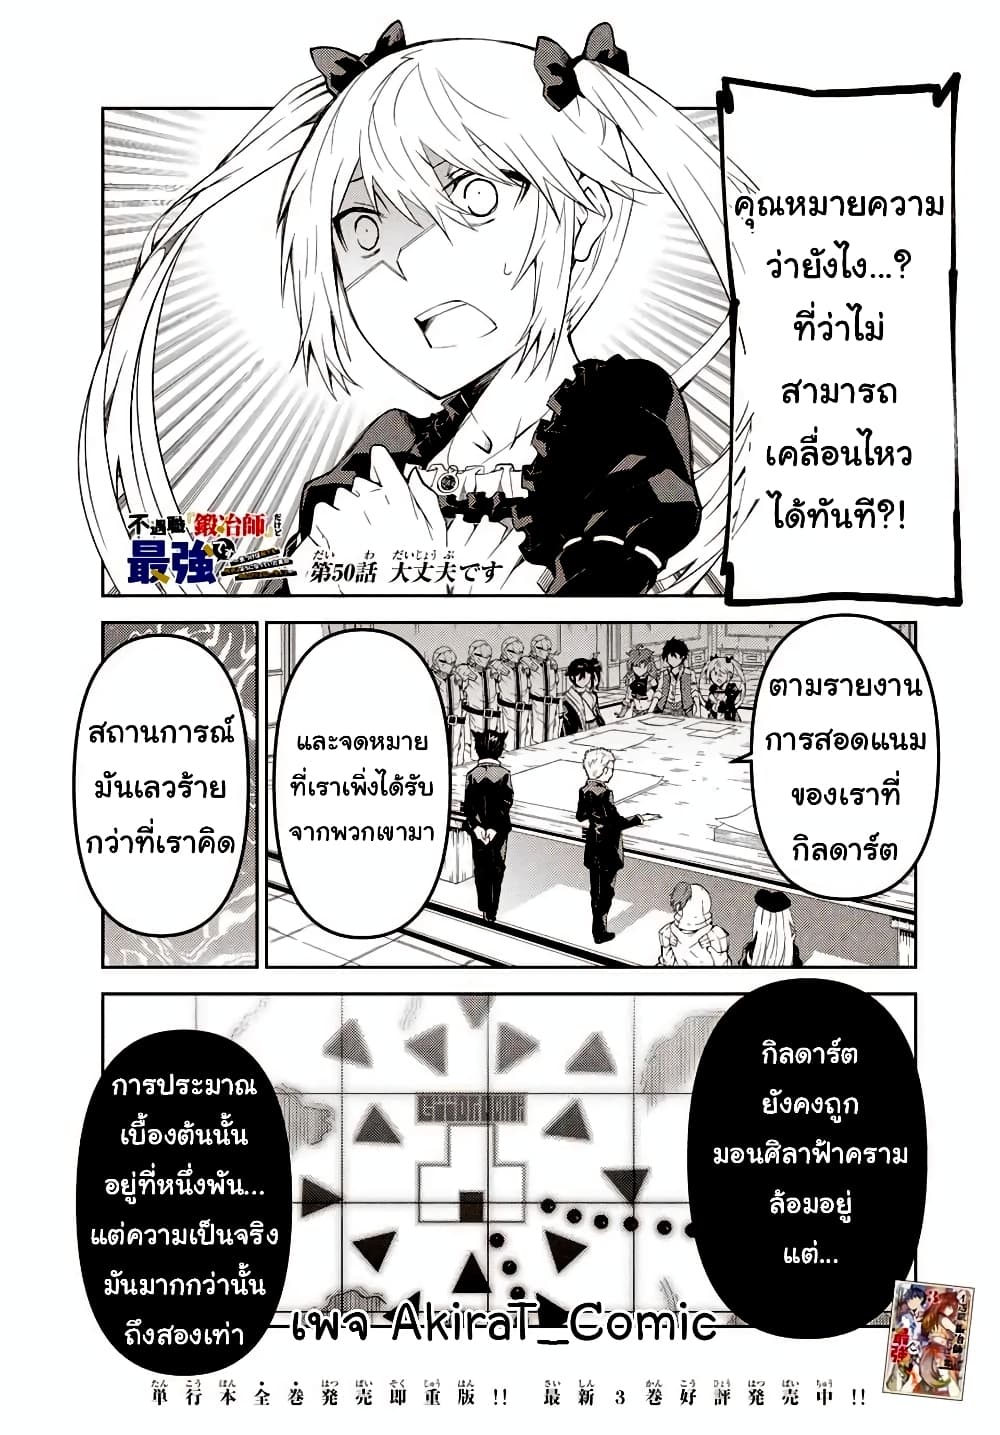 The Weakest Occupation "Blacksmith", but It's Actually the Strongest ช่างตีเหล็กอาชีพกระจอก? 50-50